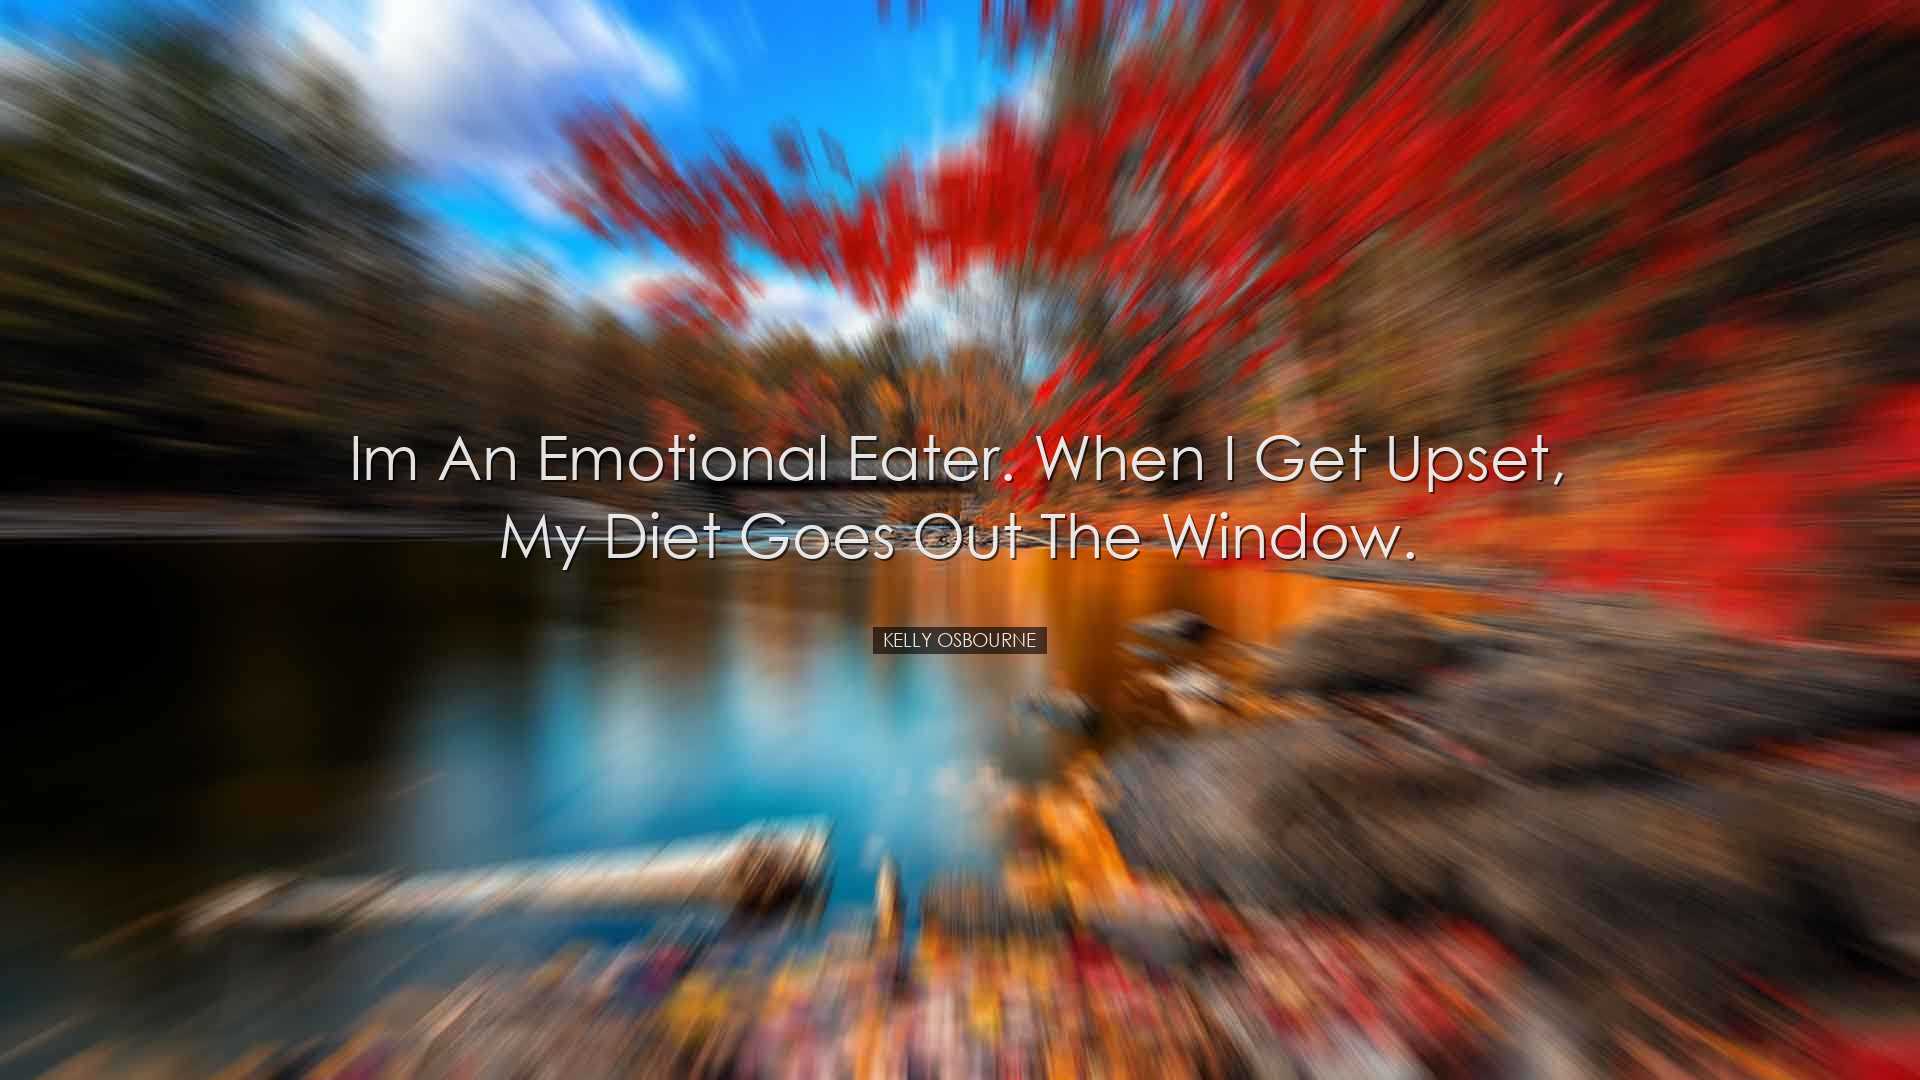 Im an emotional eater. When I get upset, my diet goes out the wind